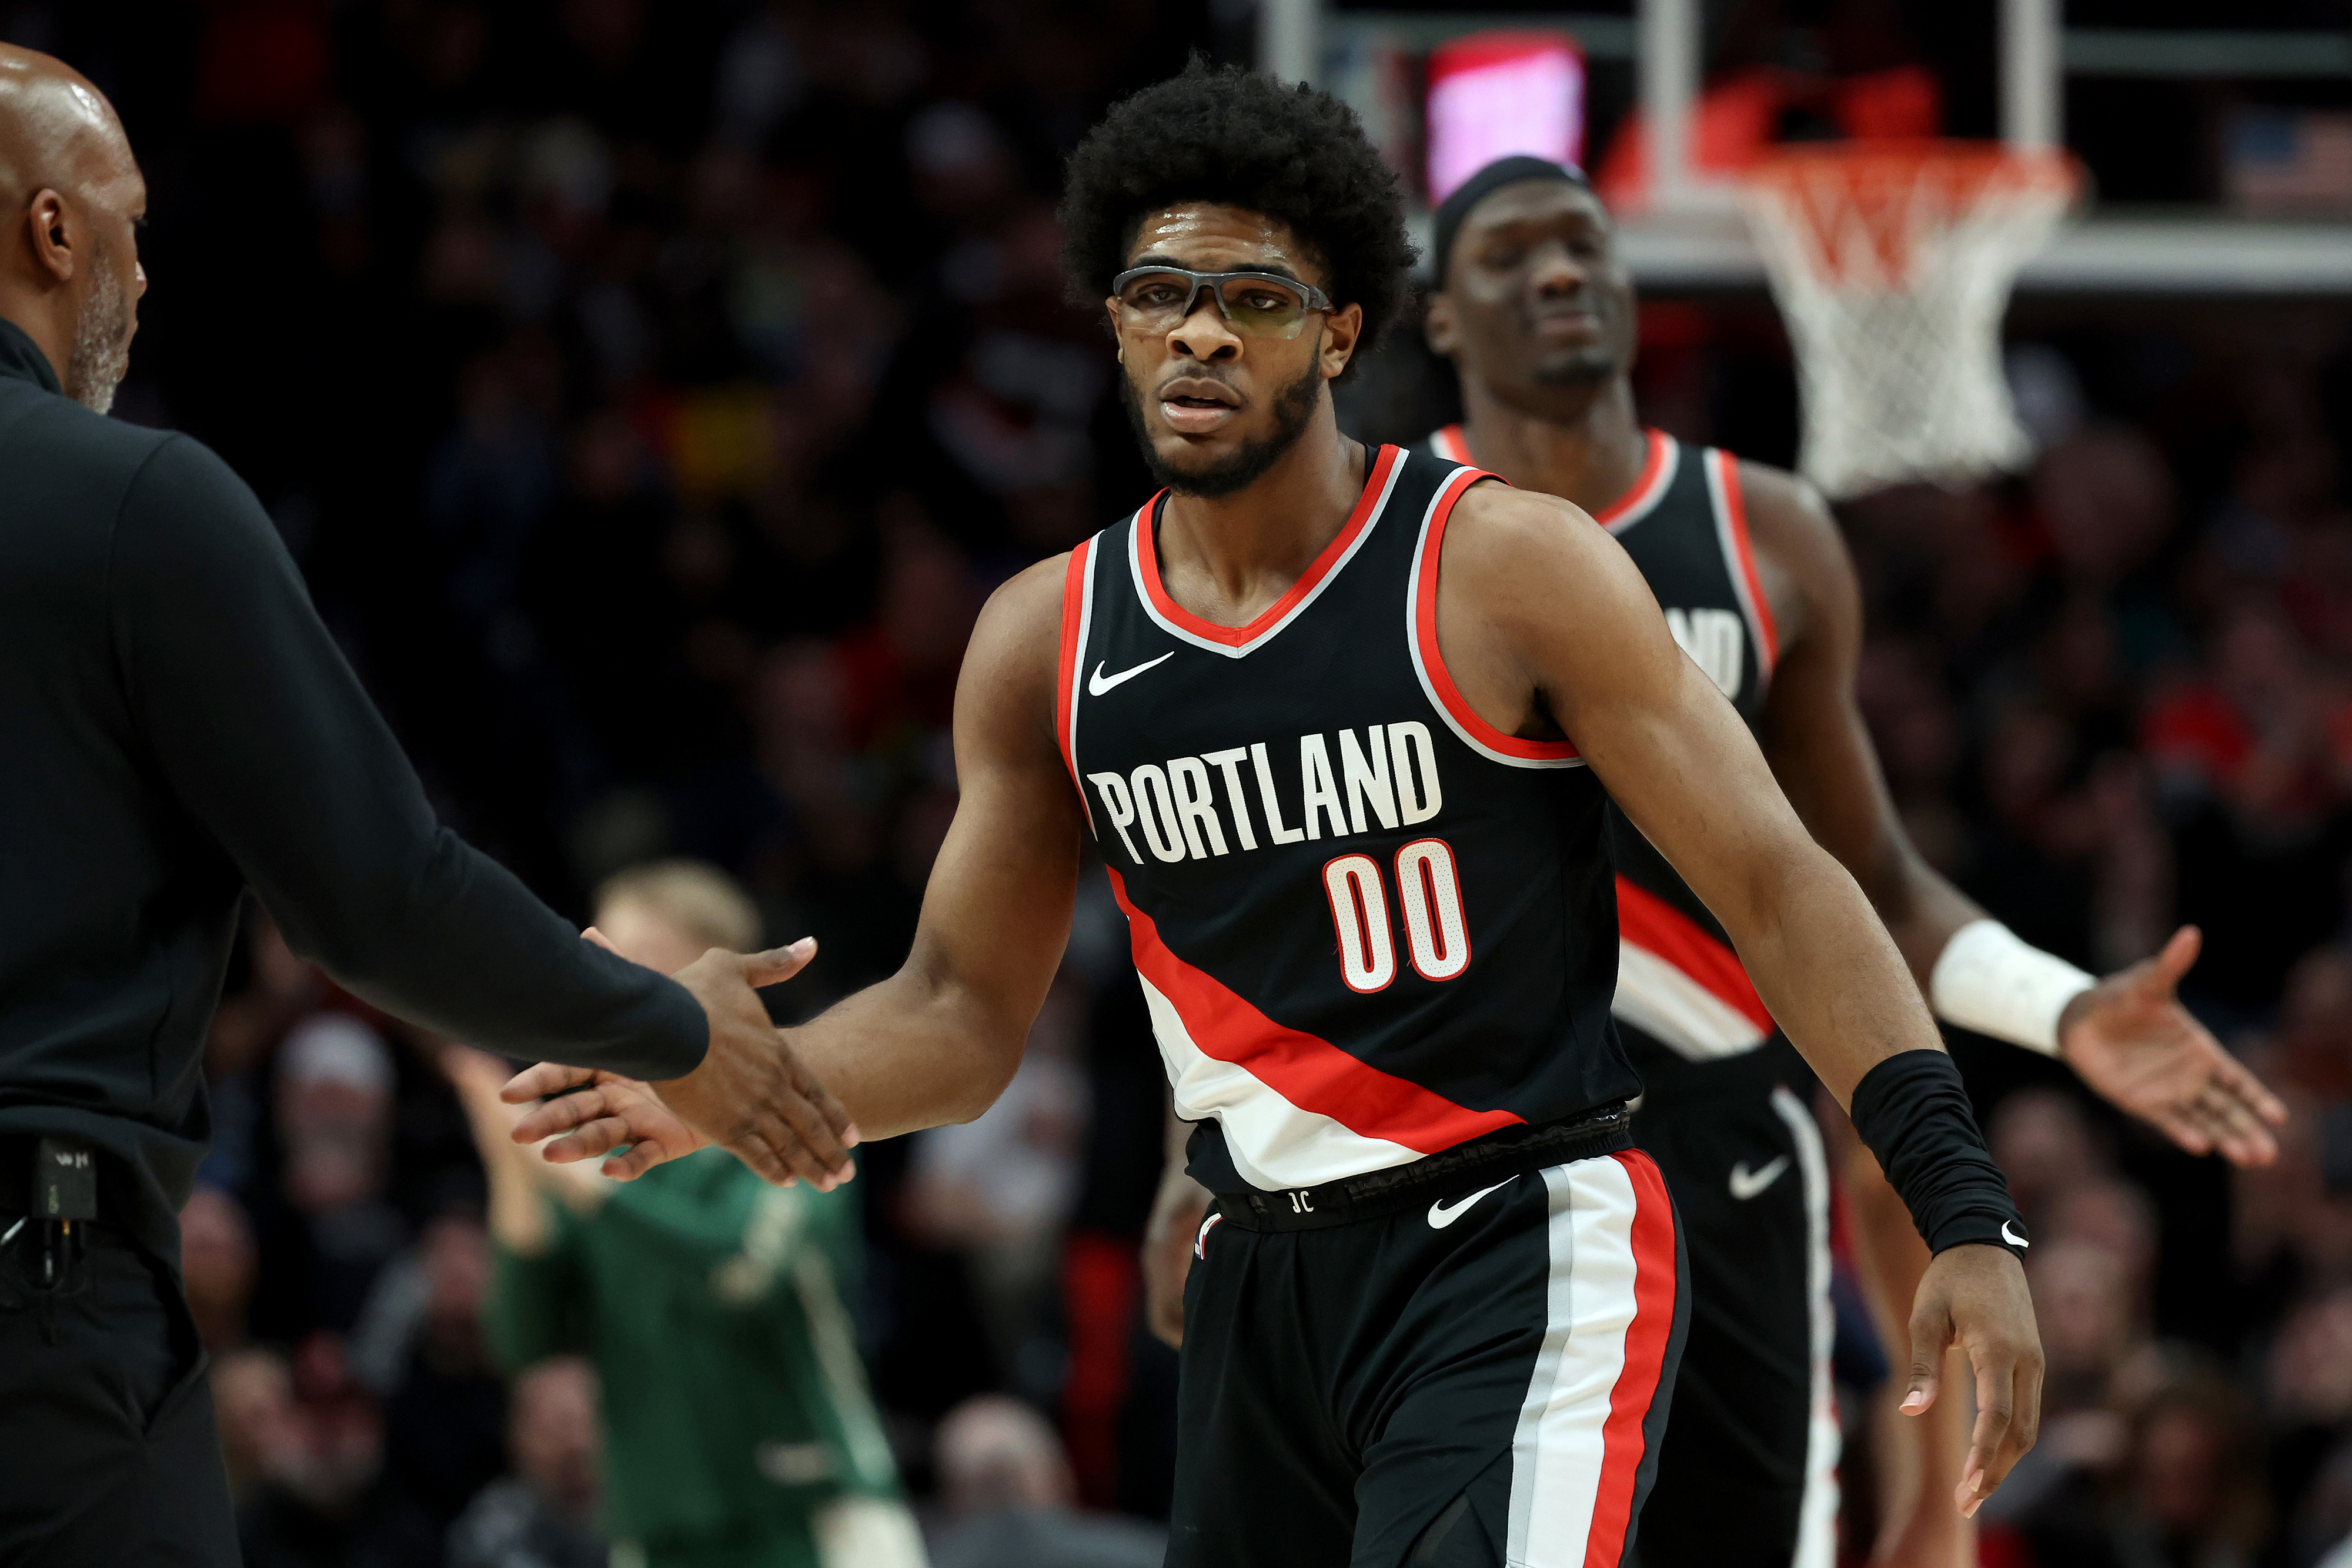 Basketball player in Portland Trail Blazers uniform high-fiving a teammate on the court